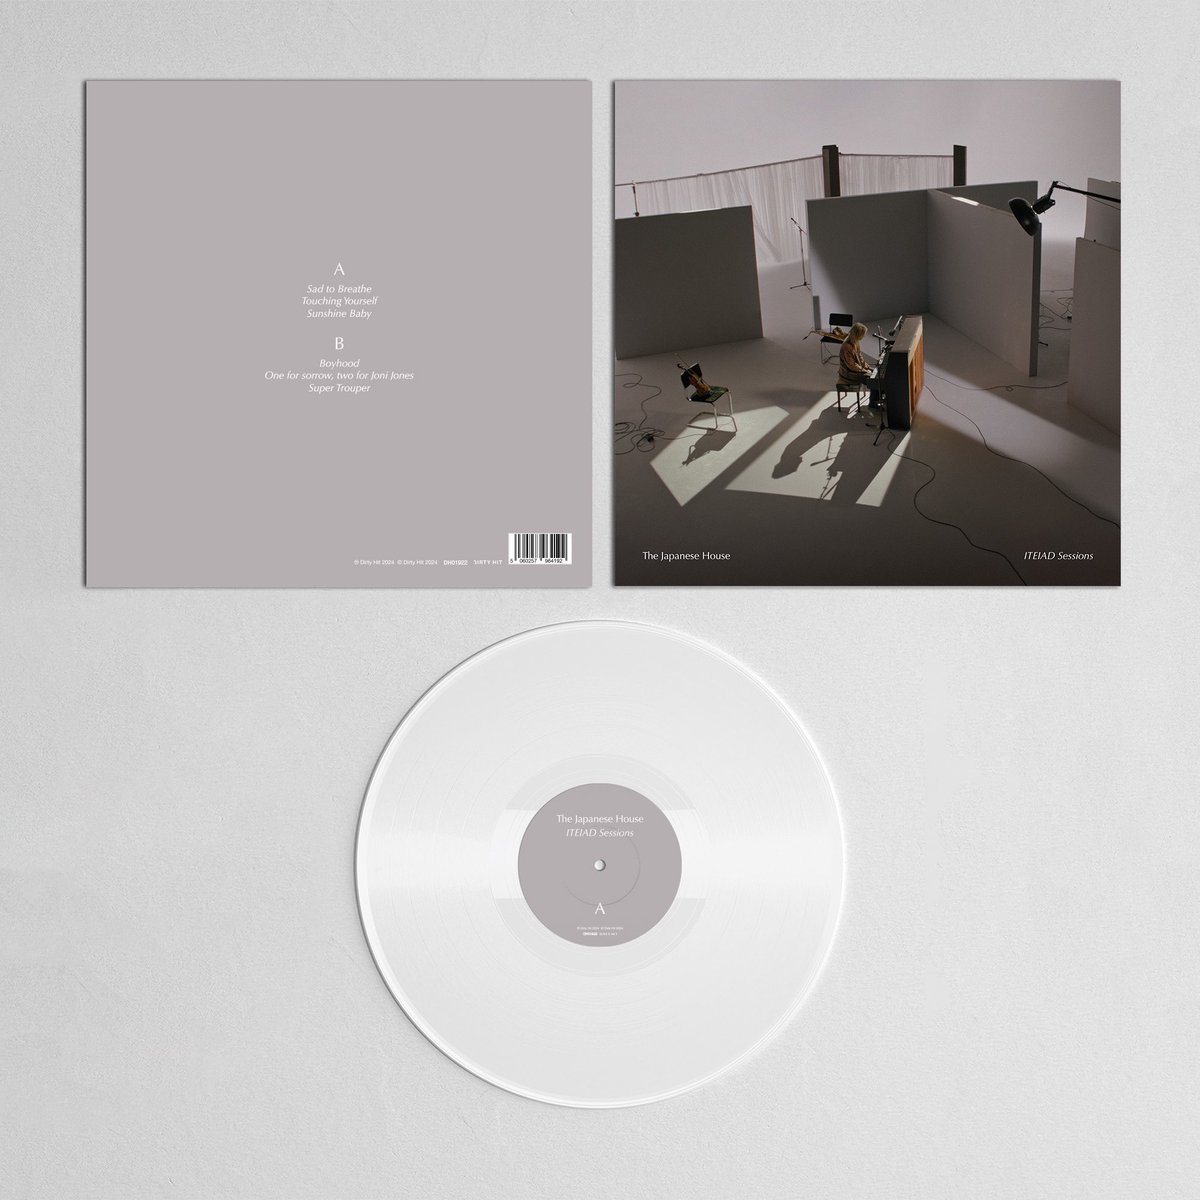 'ITEIAD Sessions' limited edition white vinyl for @RSDUK ☀️ Available 20th April 2024. Sign up now: thejapanesehouse.co.uk/signup/